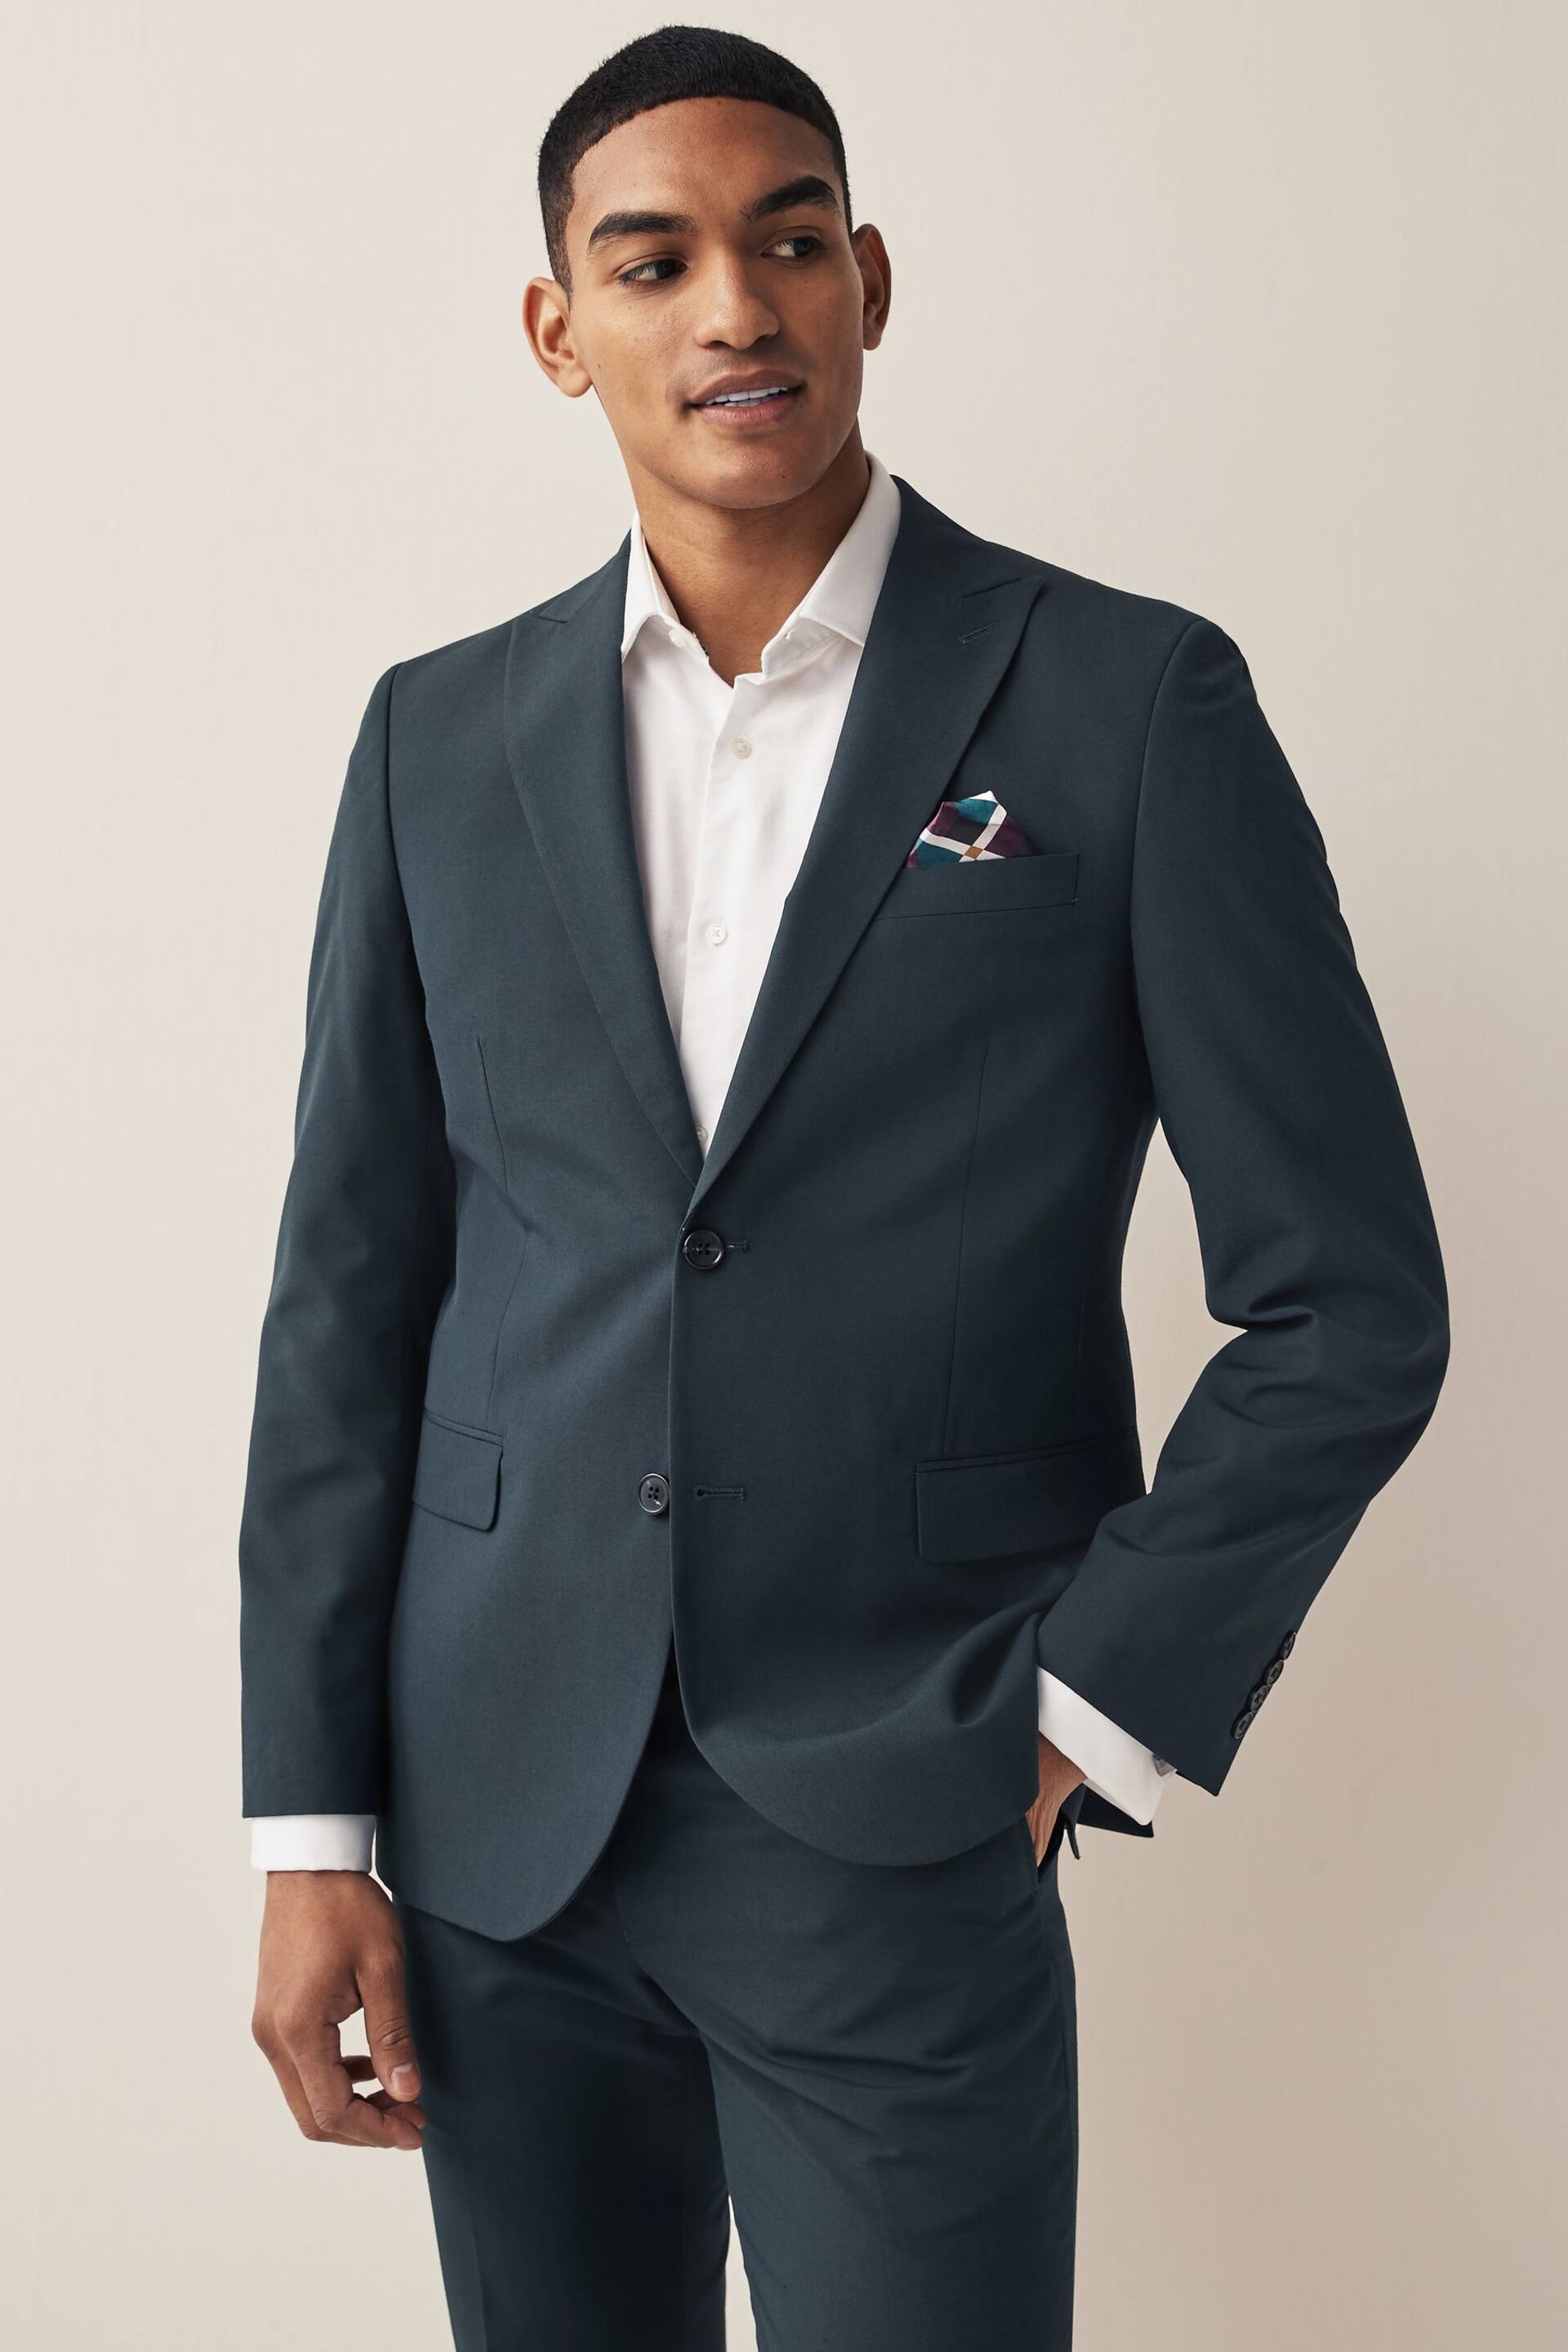 Teal Blue Two Button Suit: Jacket - Image 1 of 11